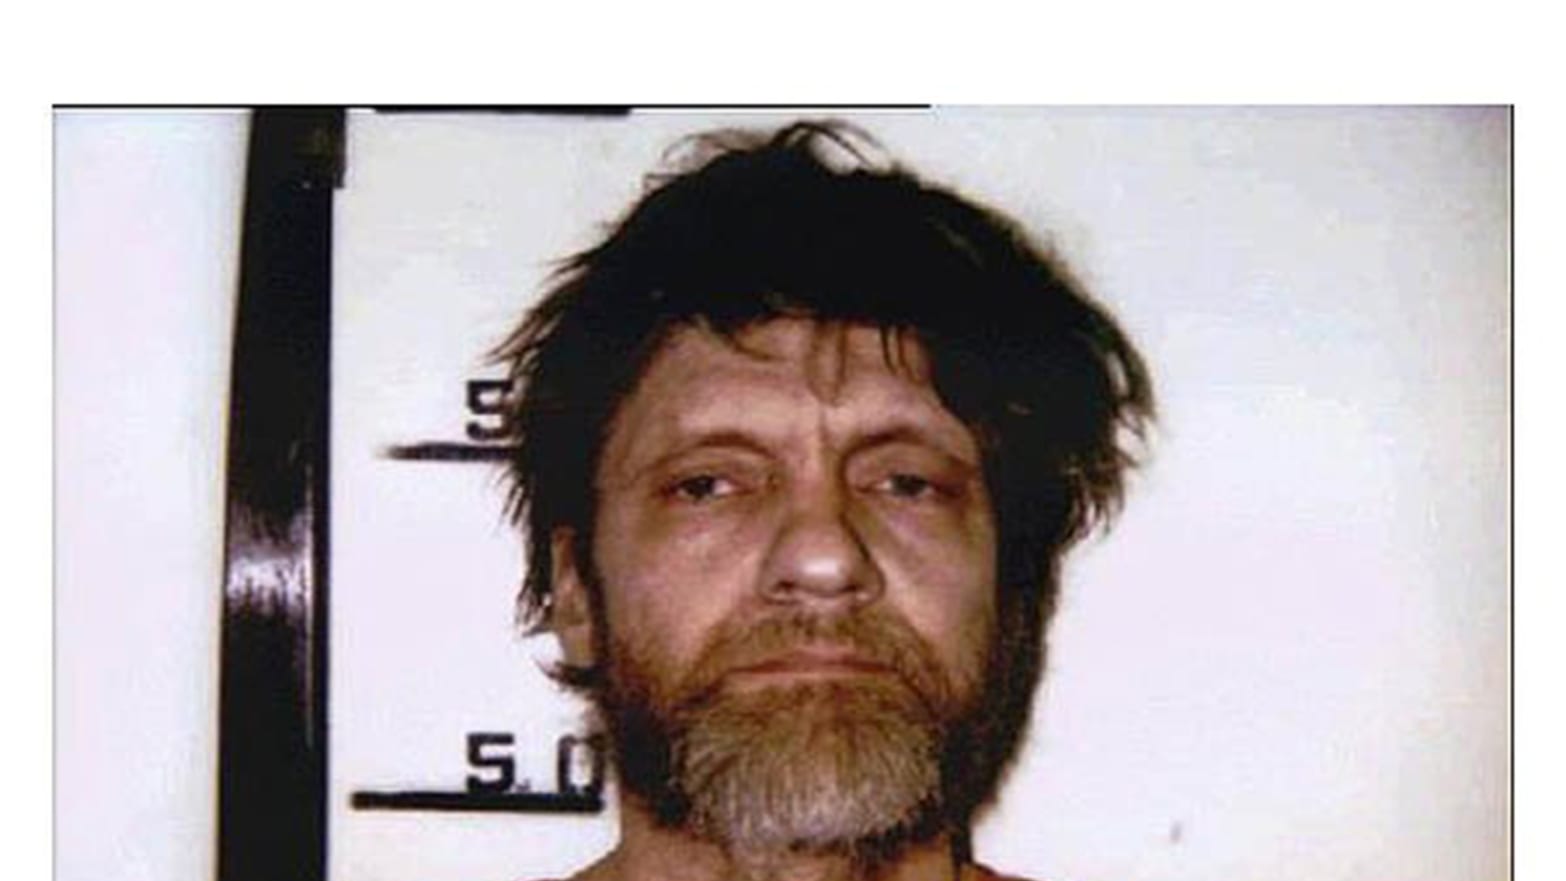 Unabomber Is Dead How Ted Kaczynski Waged a 17-Year Campaign of Terror pic